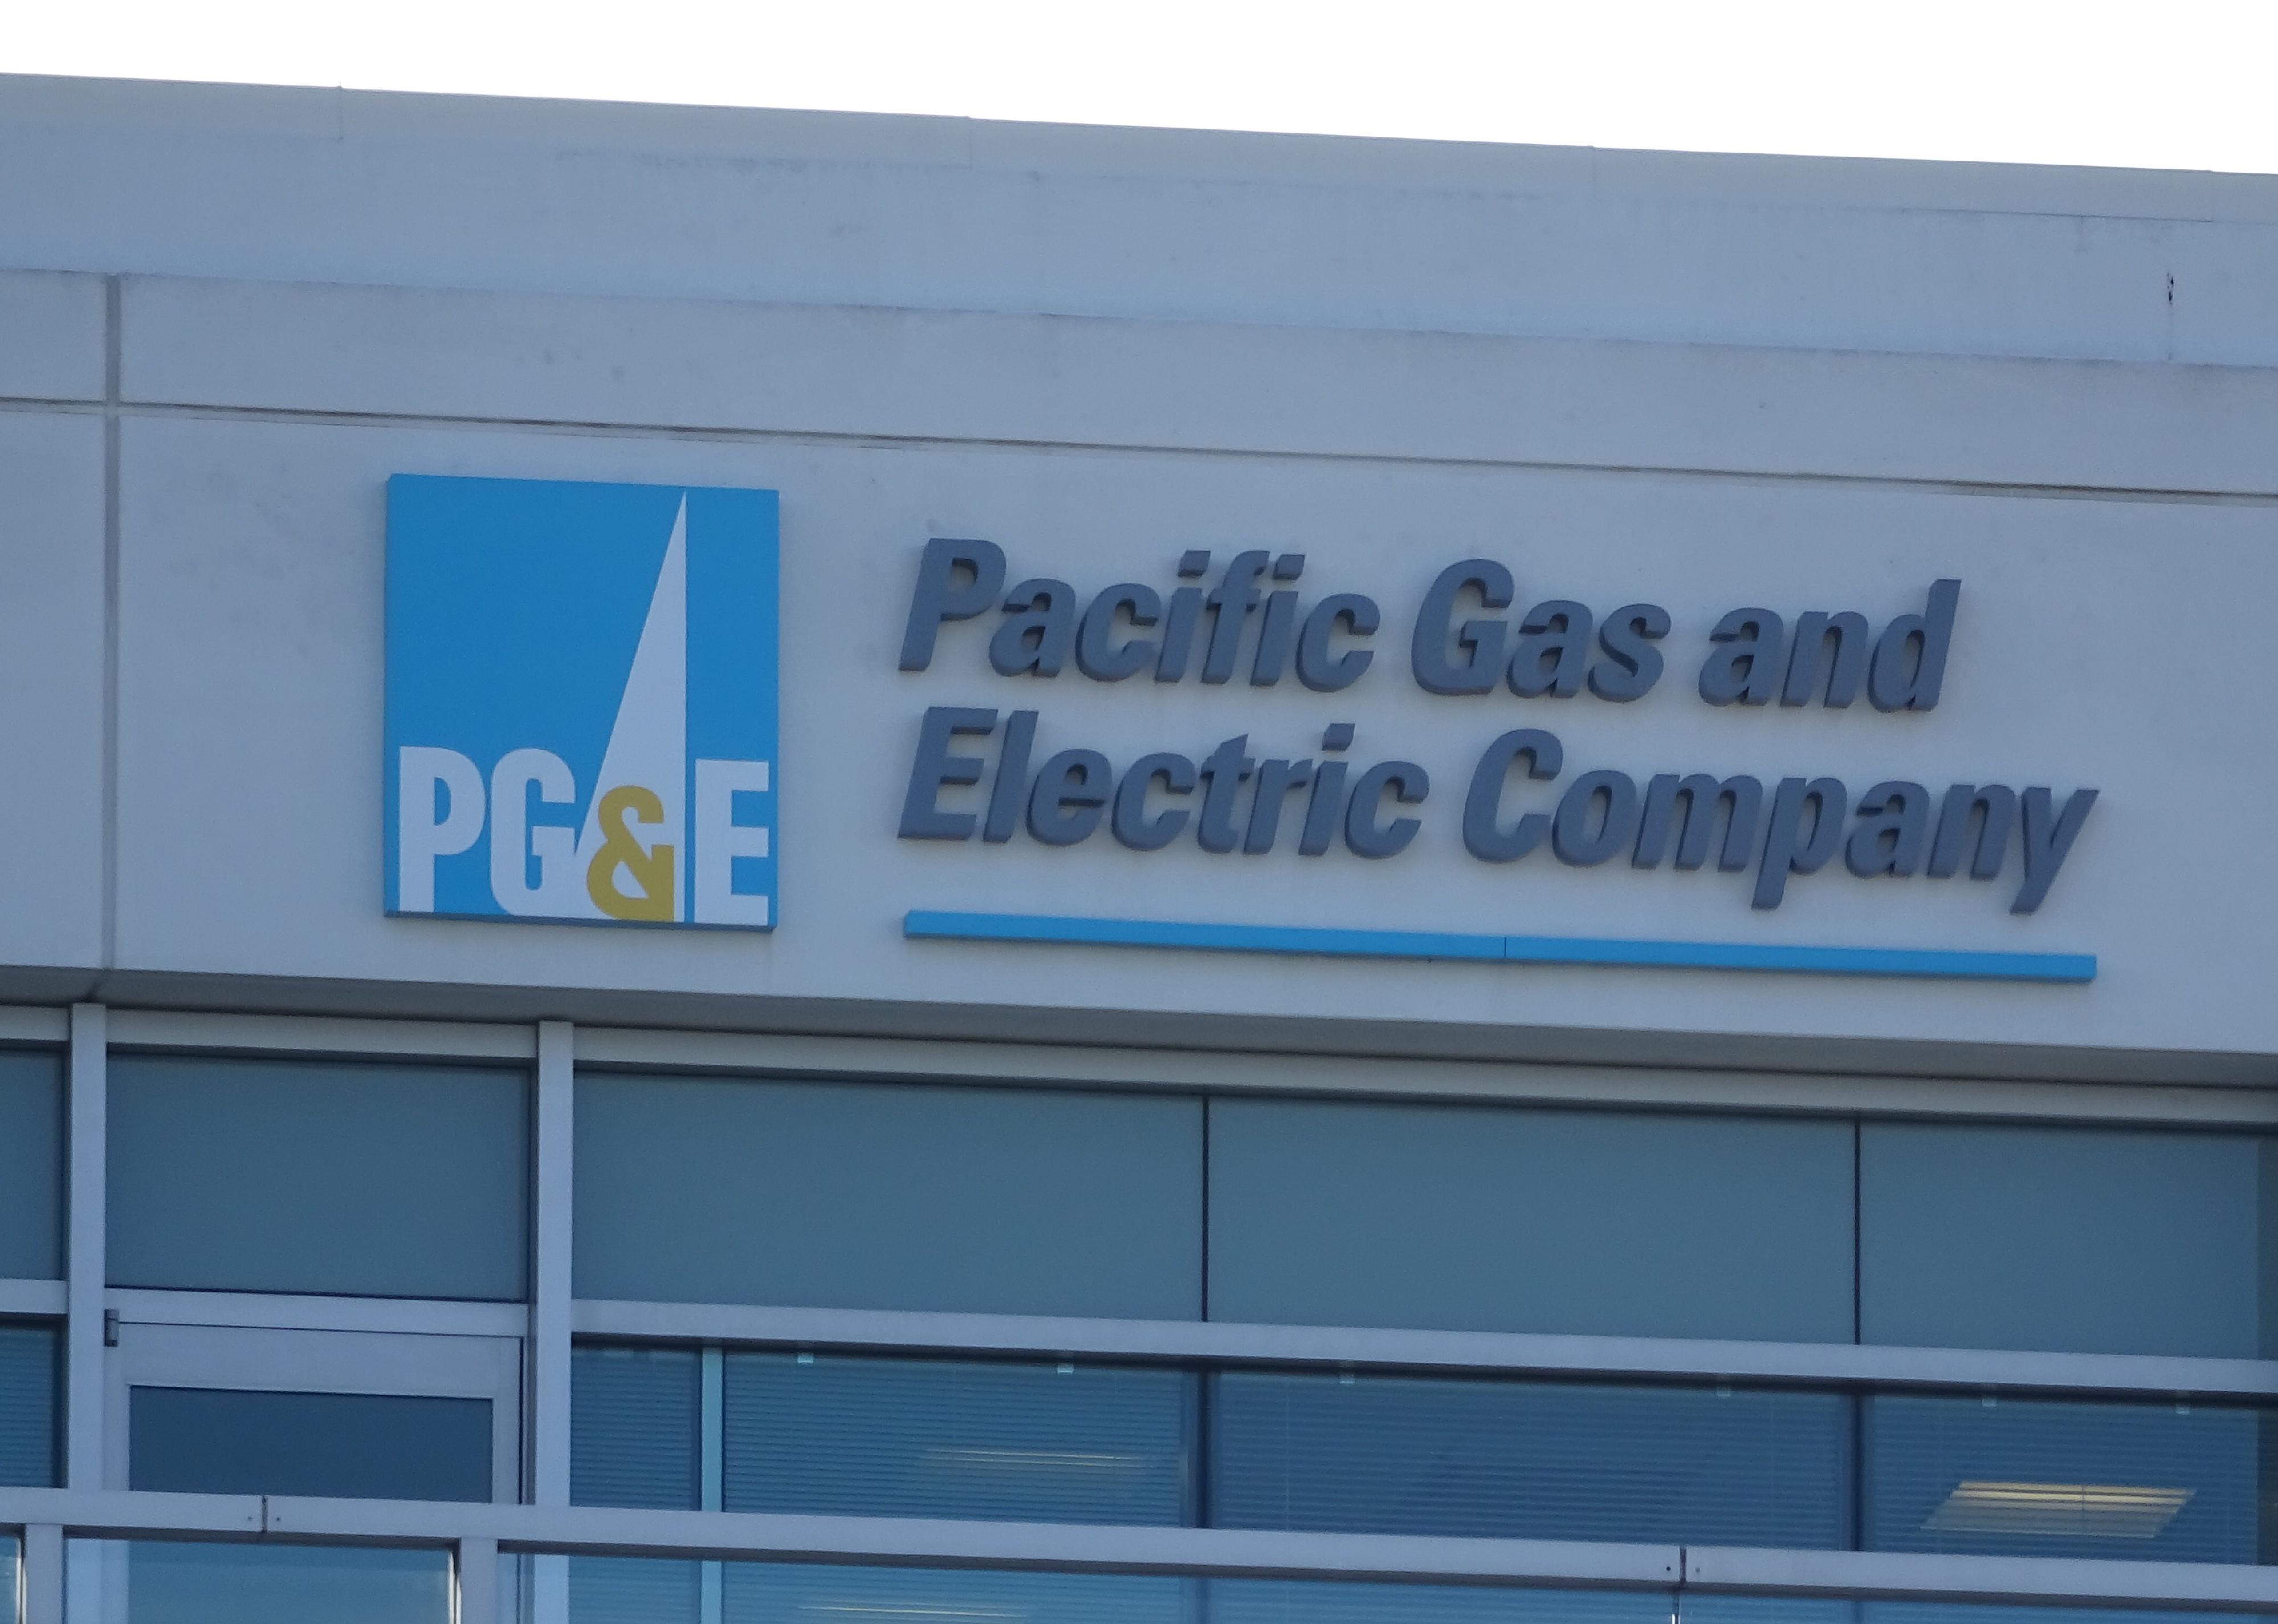 The exterior of a PGE building.